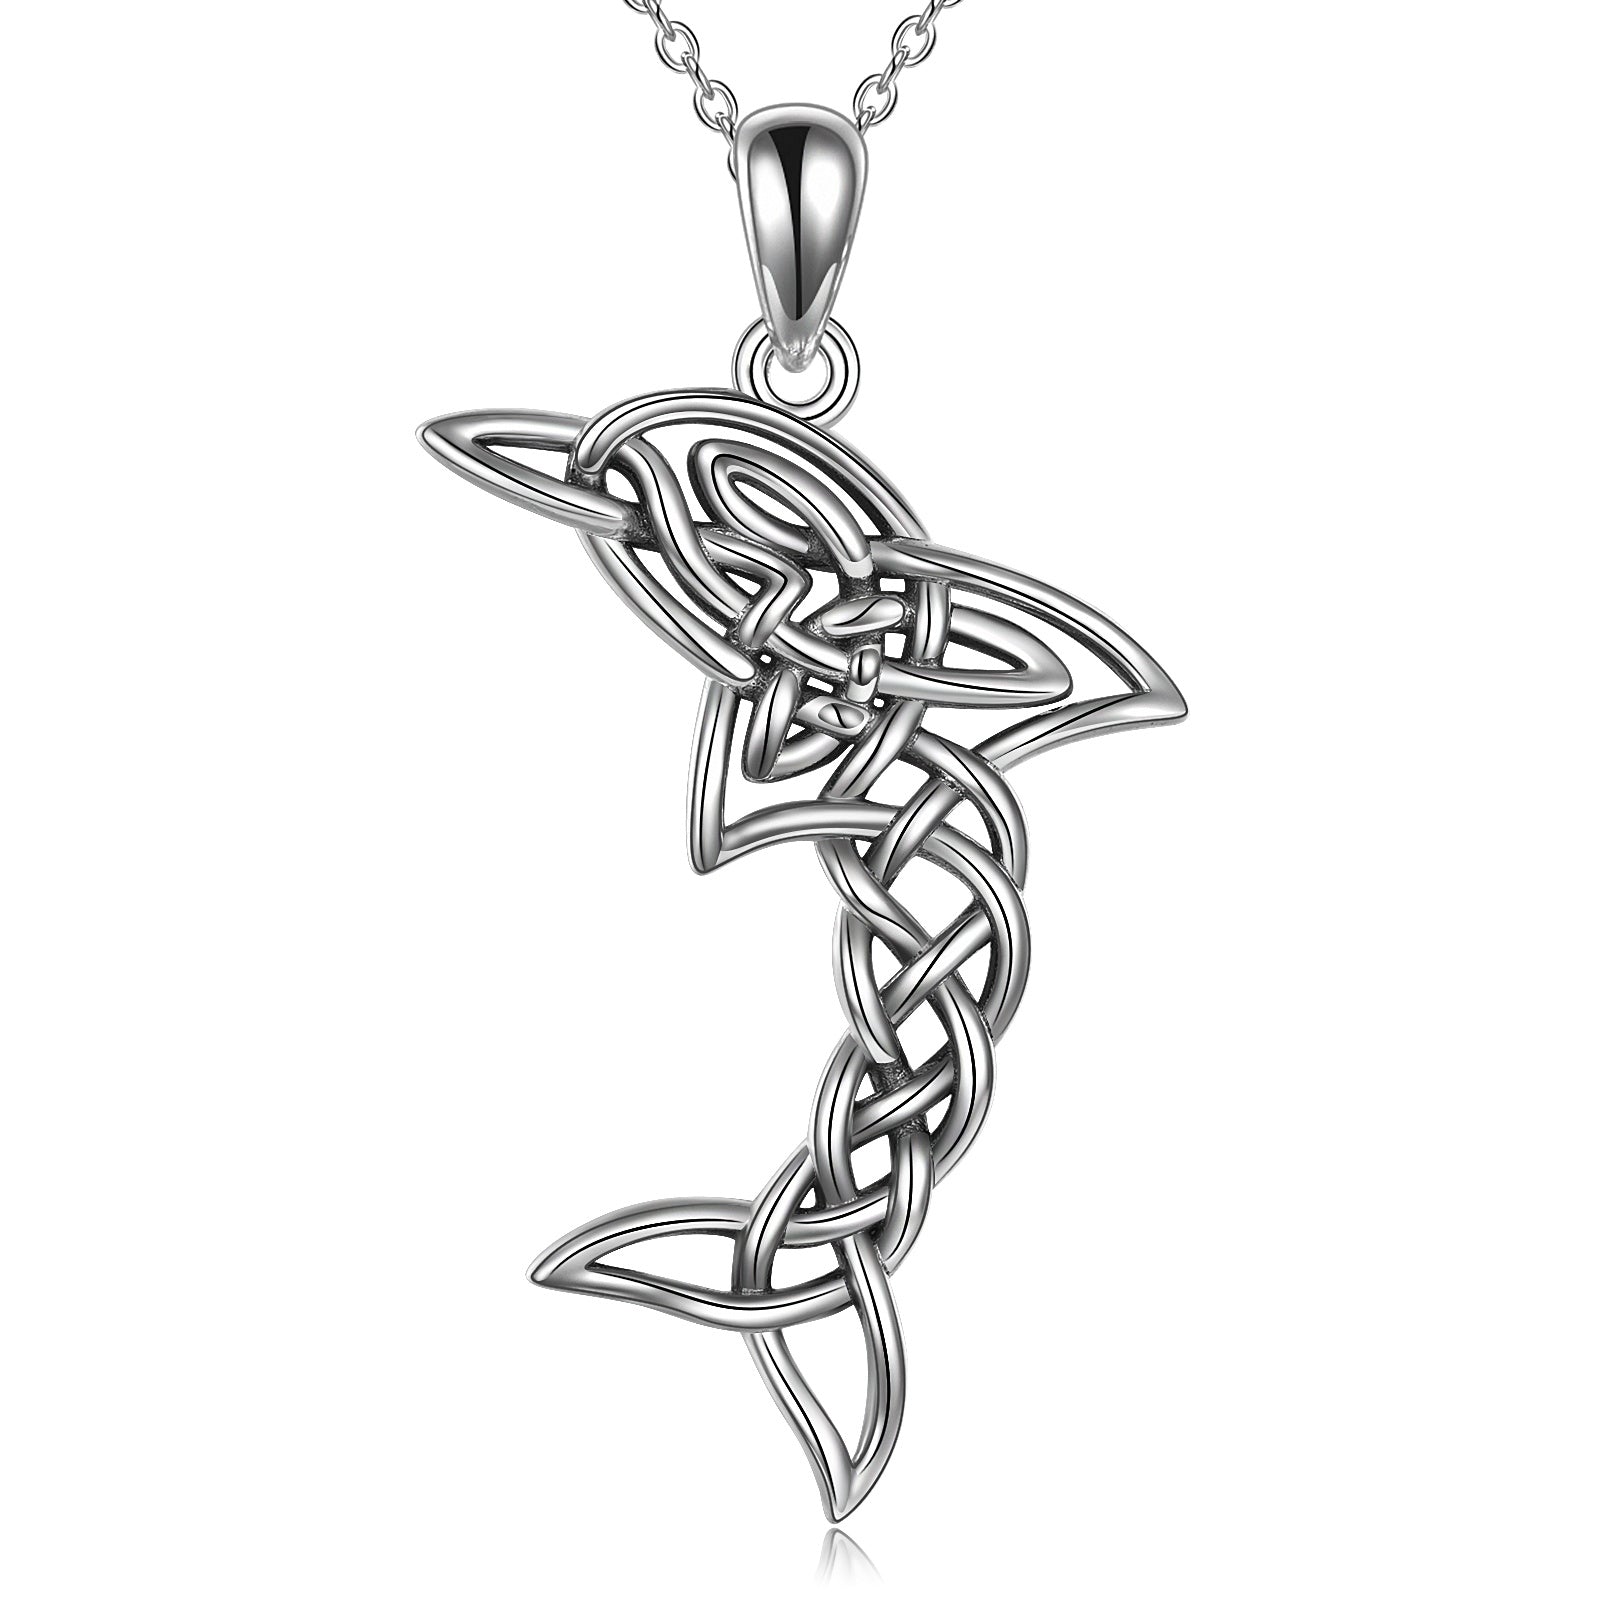 S925 Sterling Silver Celtic Knot Dolphin Pendant Necklace